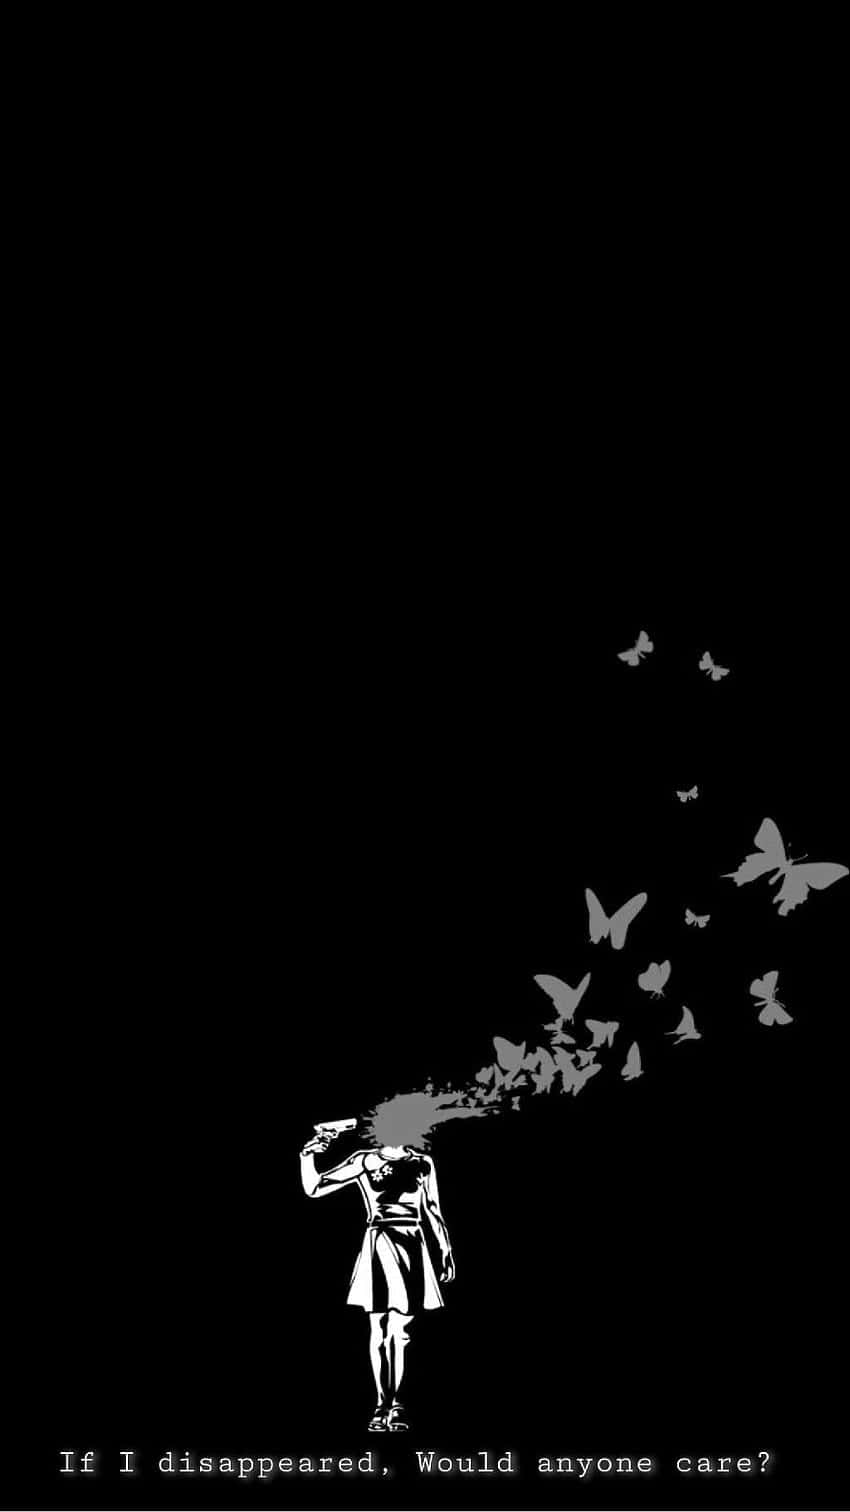 A Black And White Image Of A Person With Birds Flying Around Wallpaper